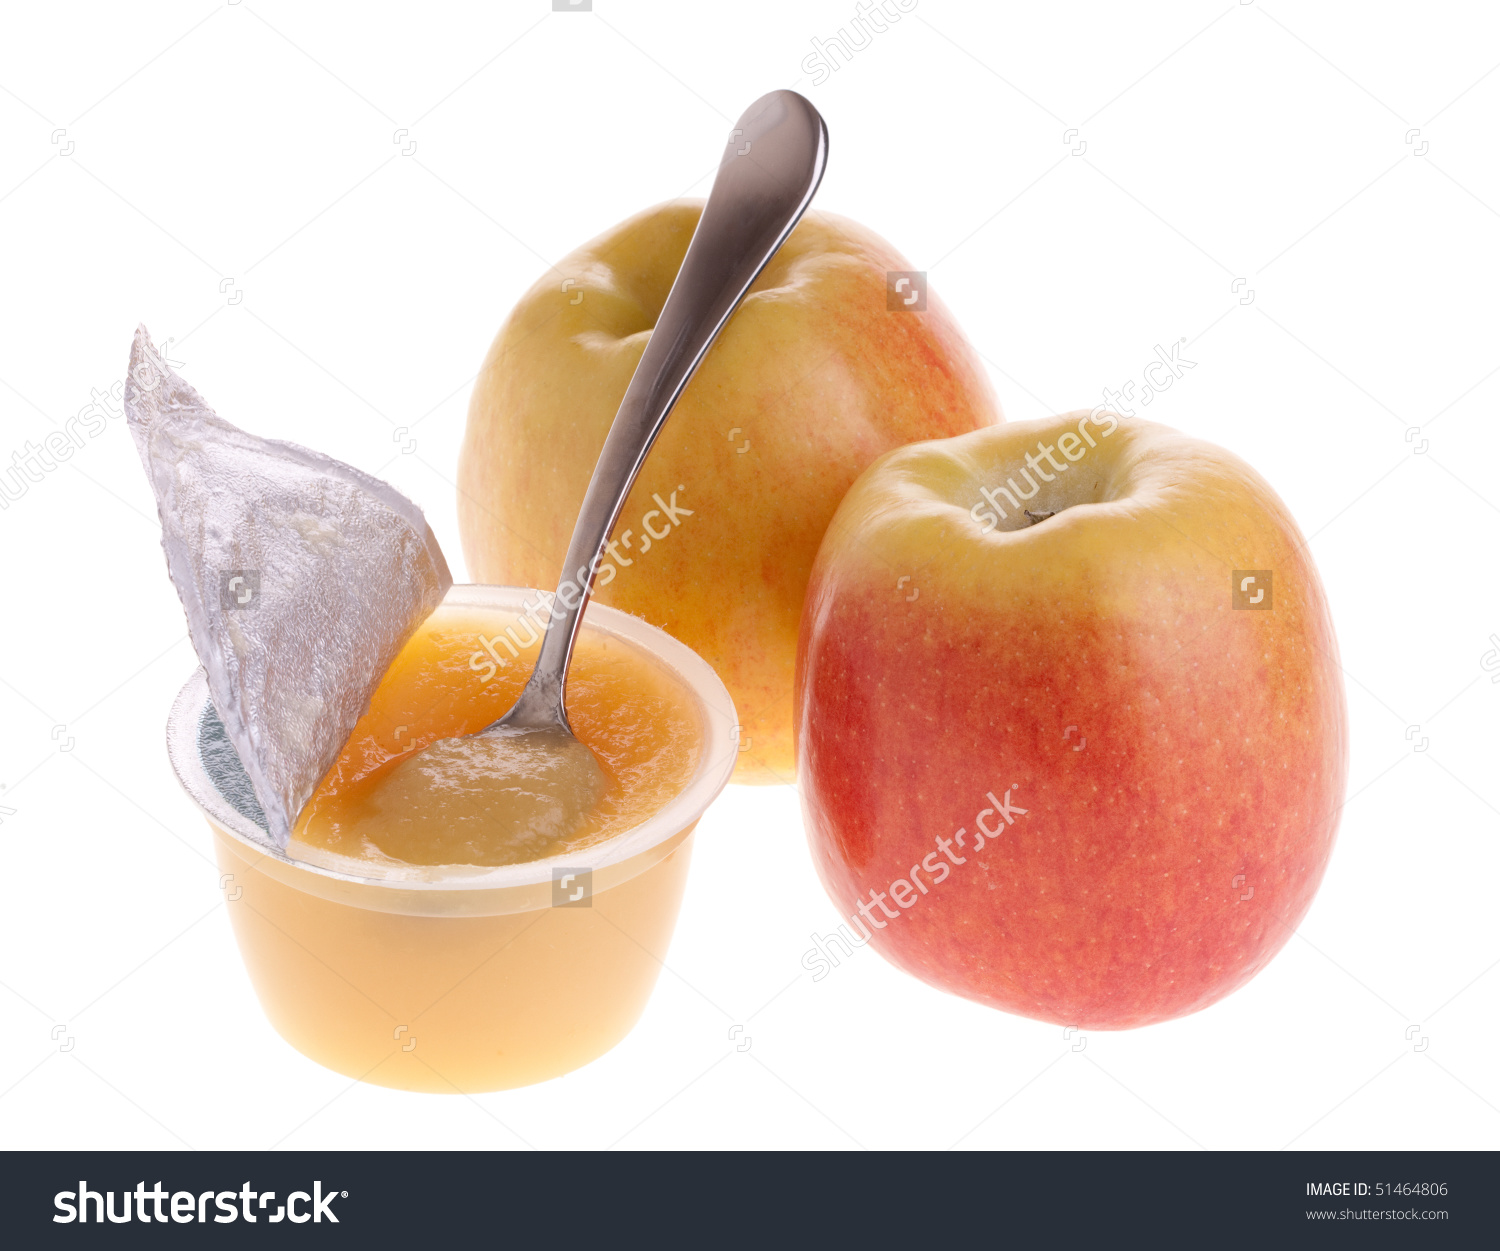 Applesauce in a Glass Bowl